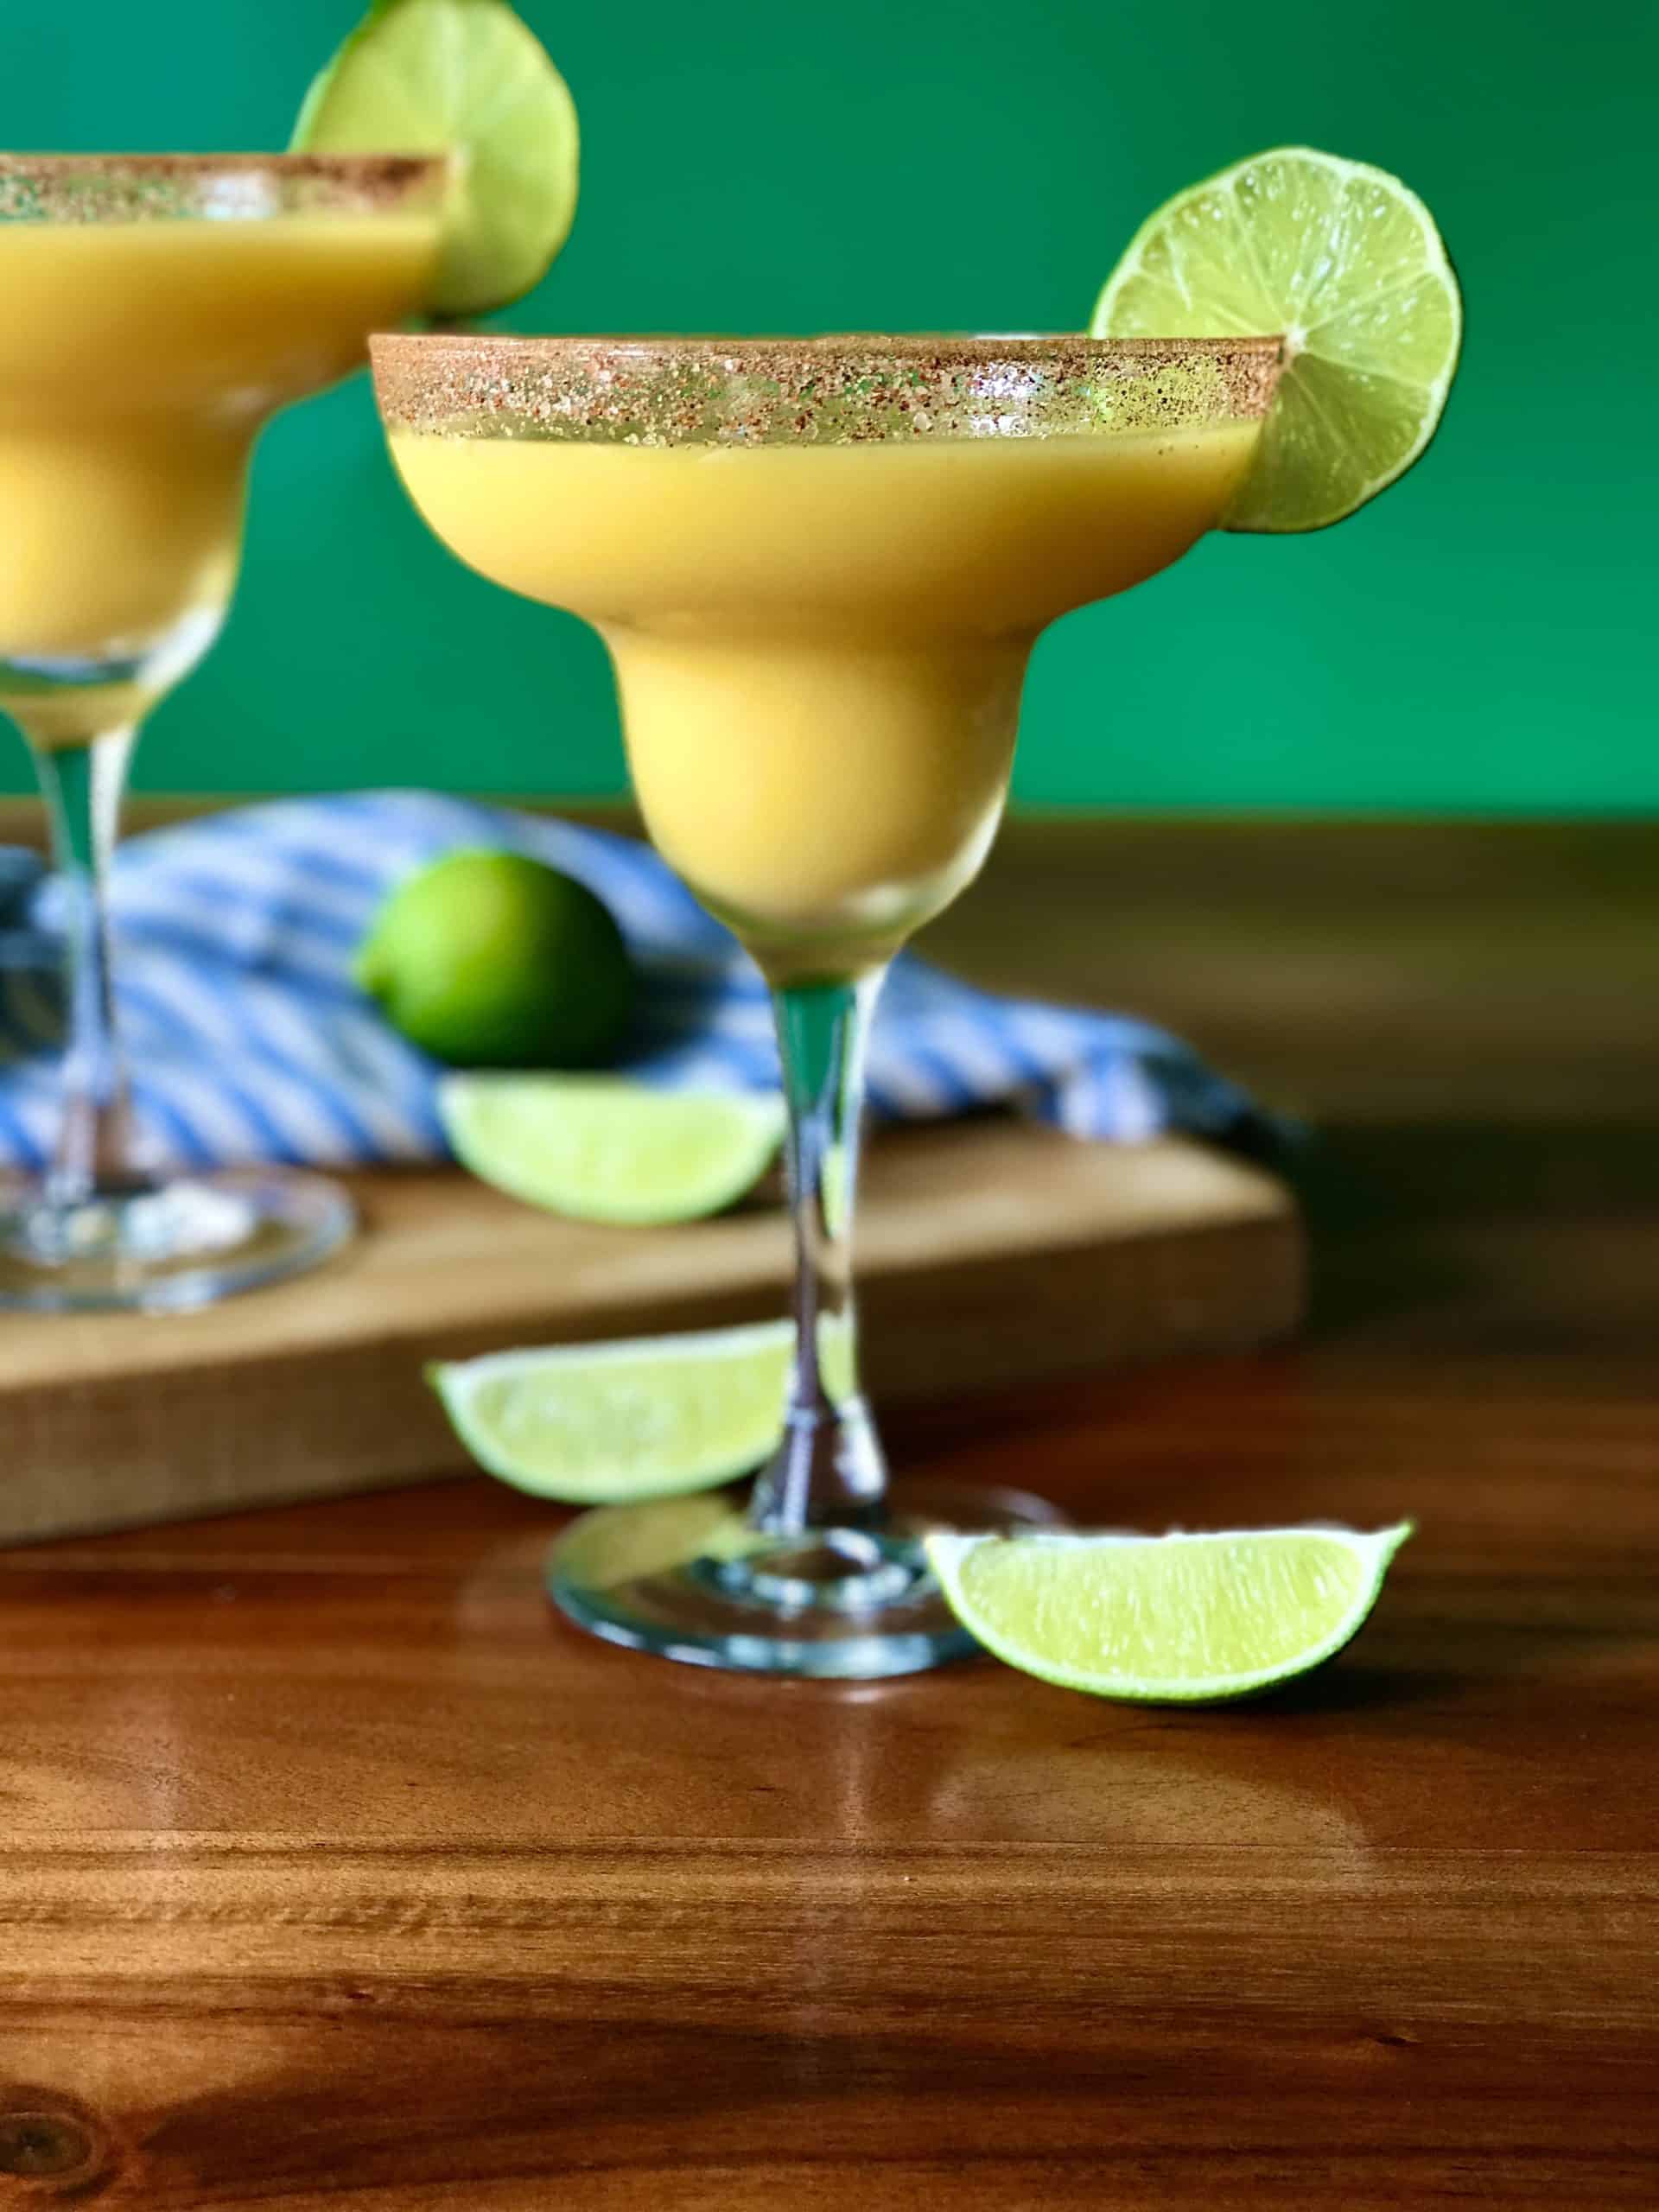 a margarita glass filled with a frozen margarita made with mango, tequila and lime juice